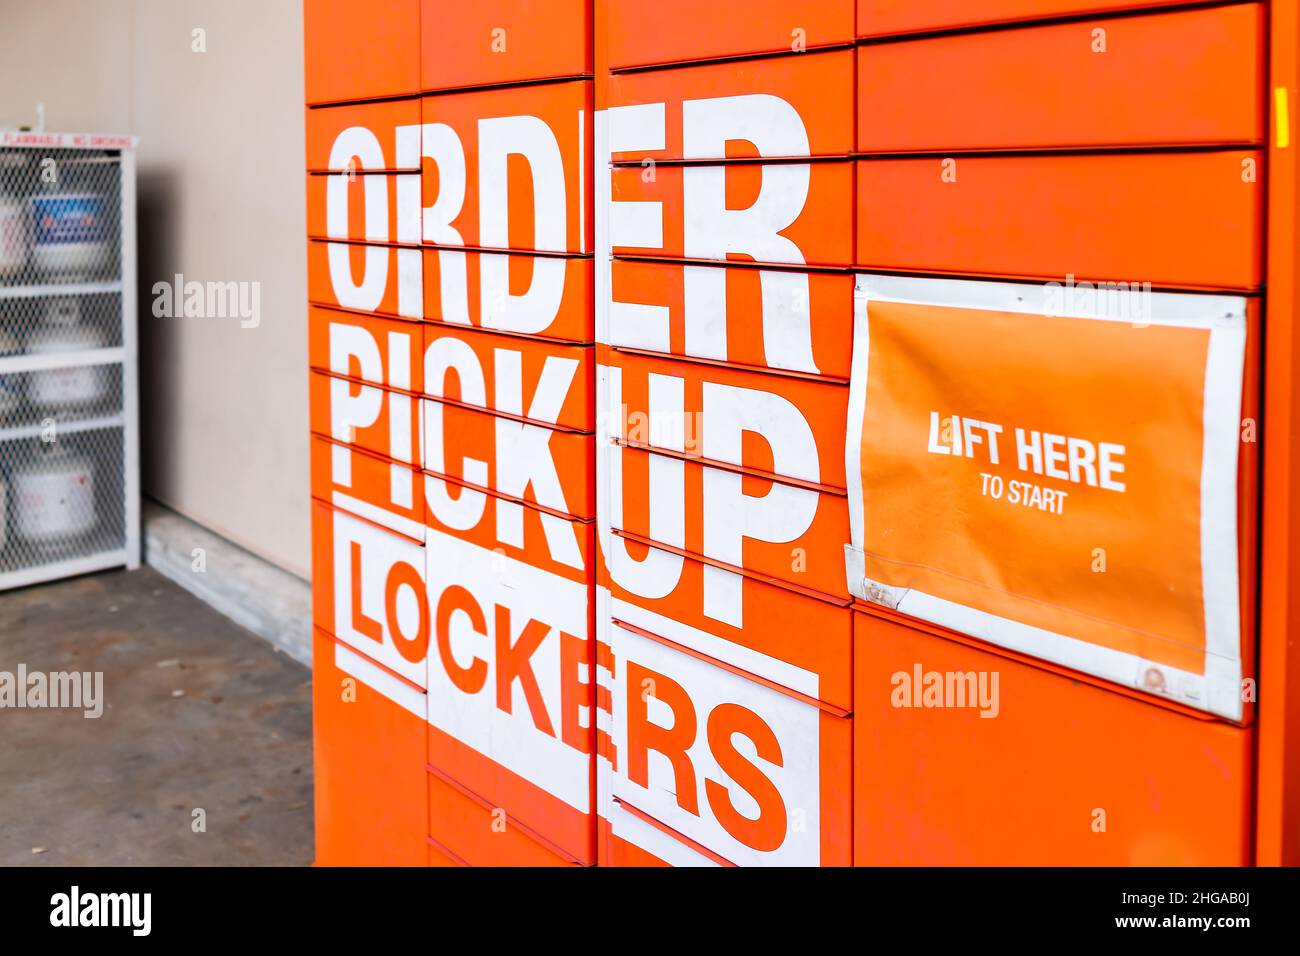 Naples, USA - August 14, 2021: The Home Depot store with orange color sign on order pickup lockers in Naples, Florida for online pick up and lift here Stock Photo